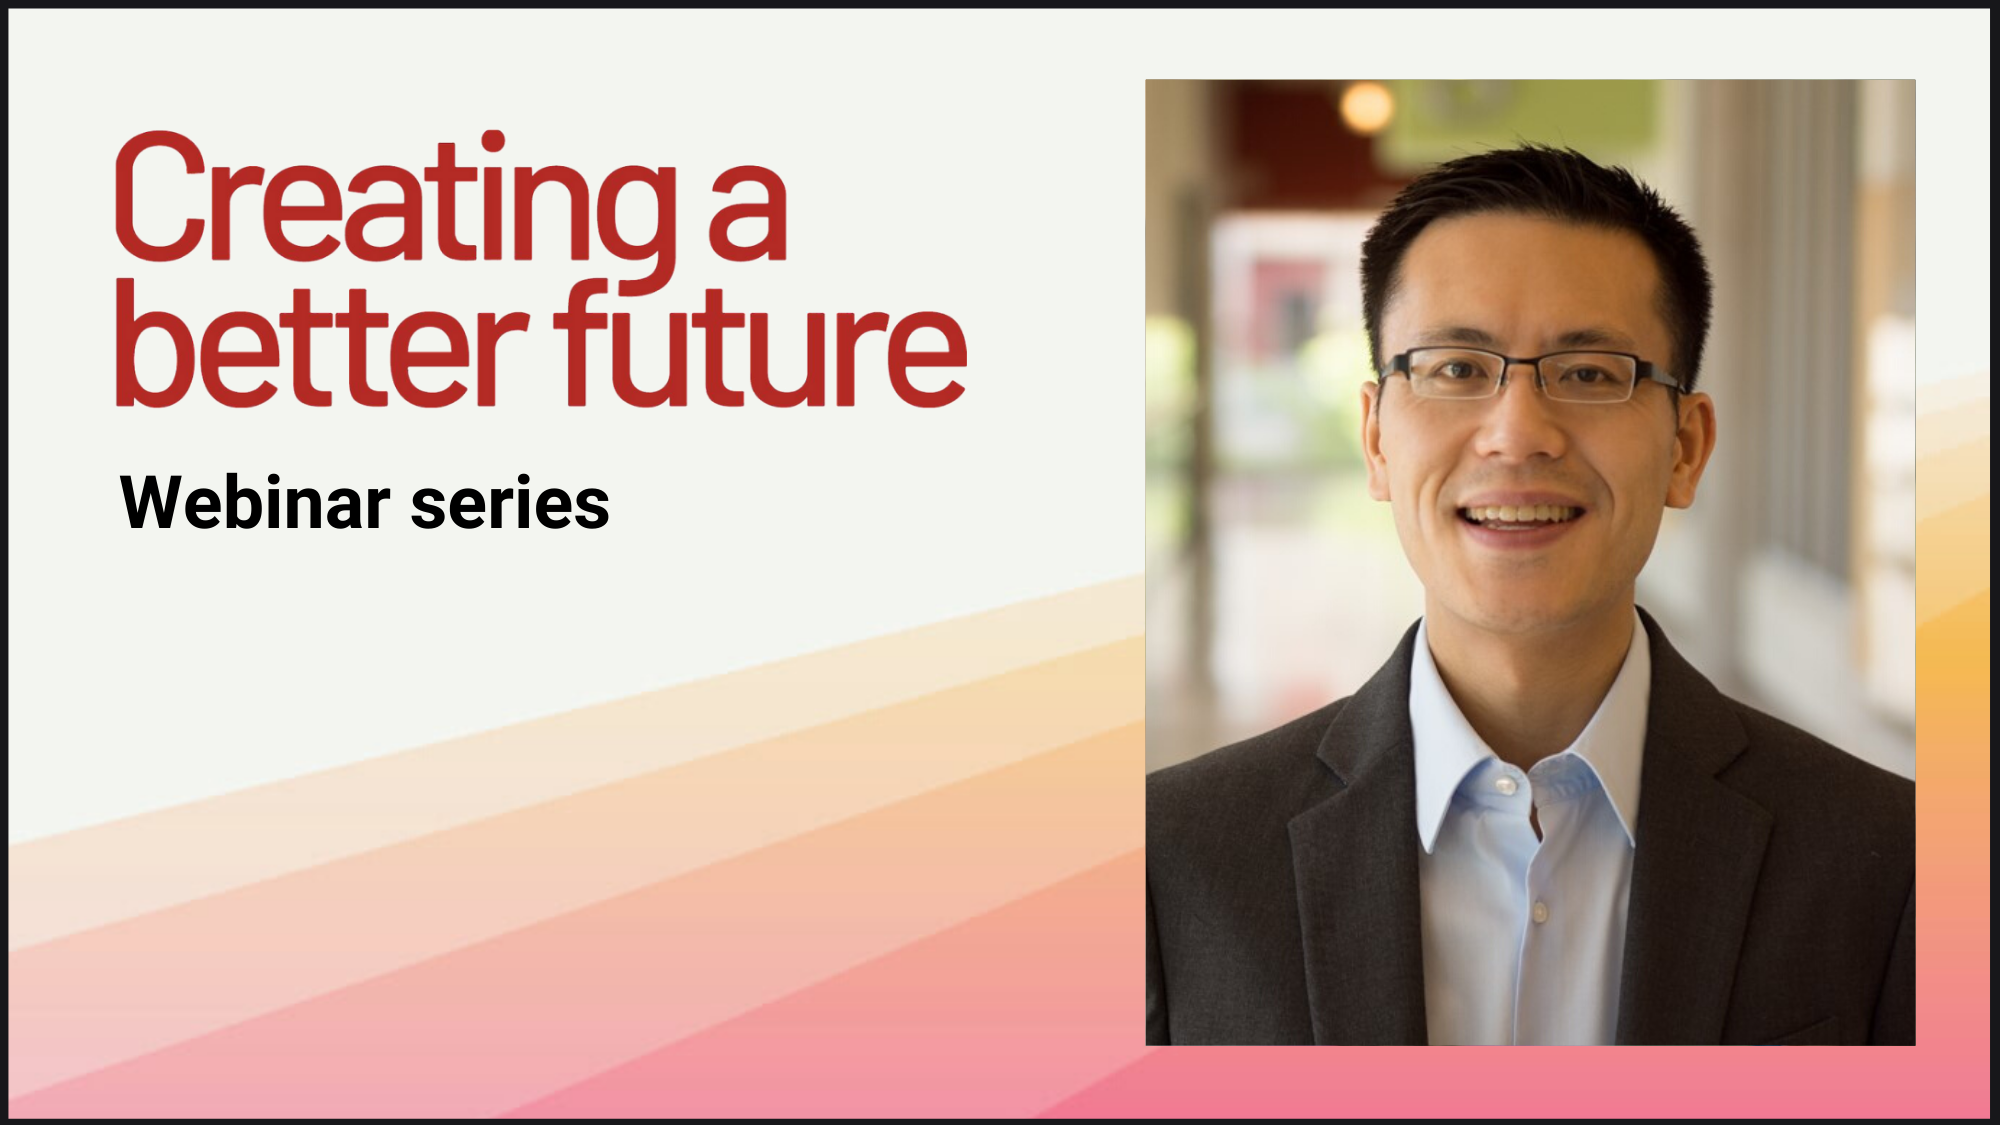 Webinar series with Dr. Chan